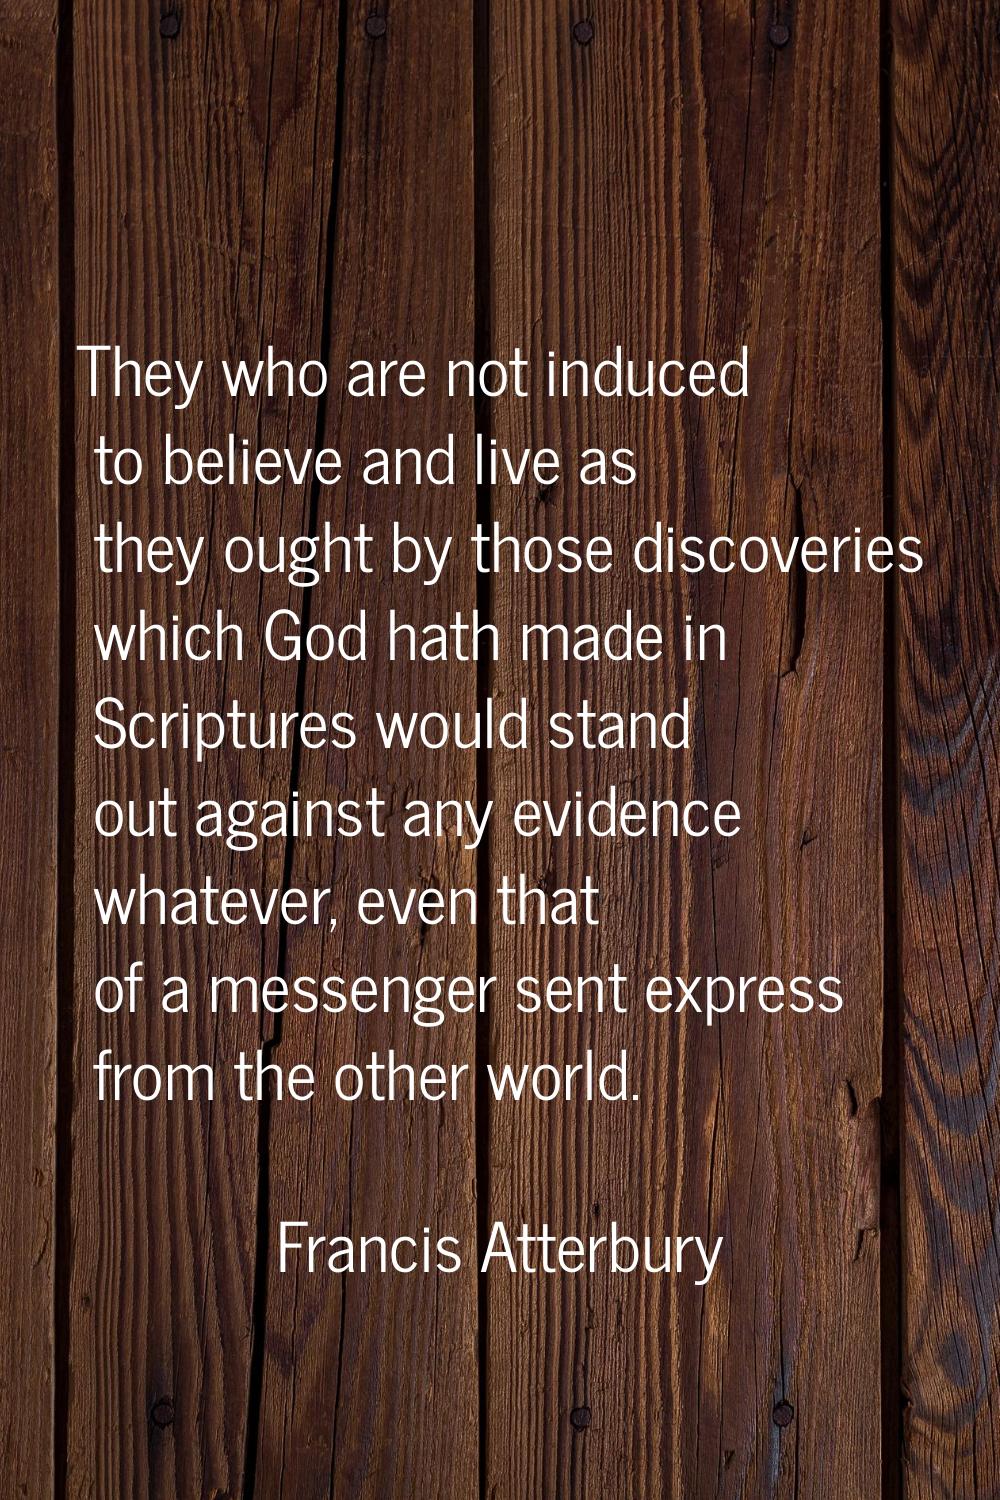 They who are not induced to believe and live as they ought by those discoveries which God hath made